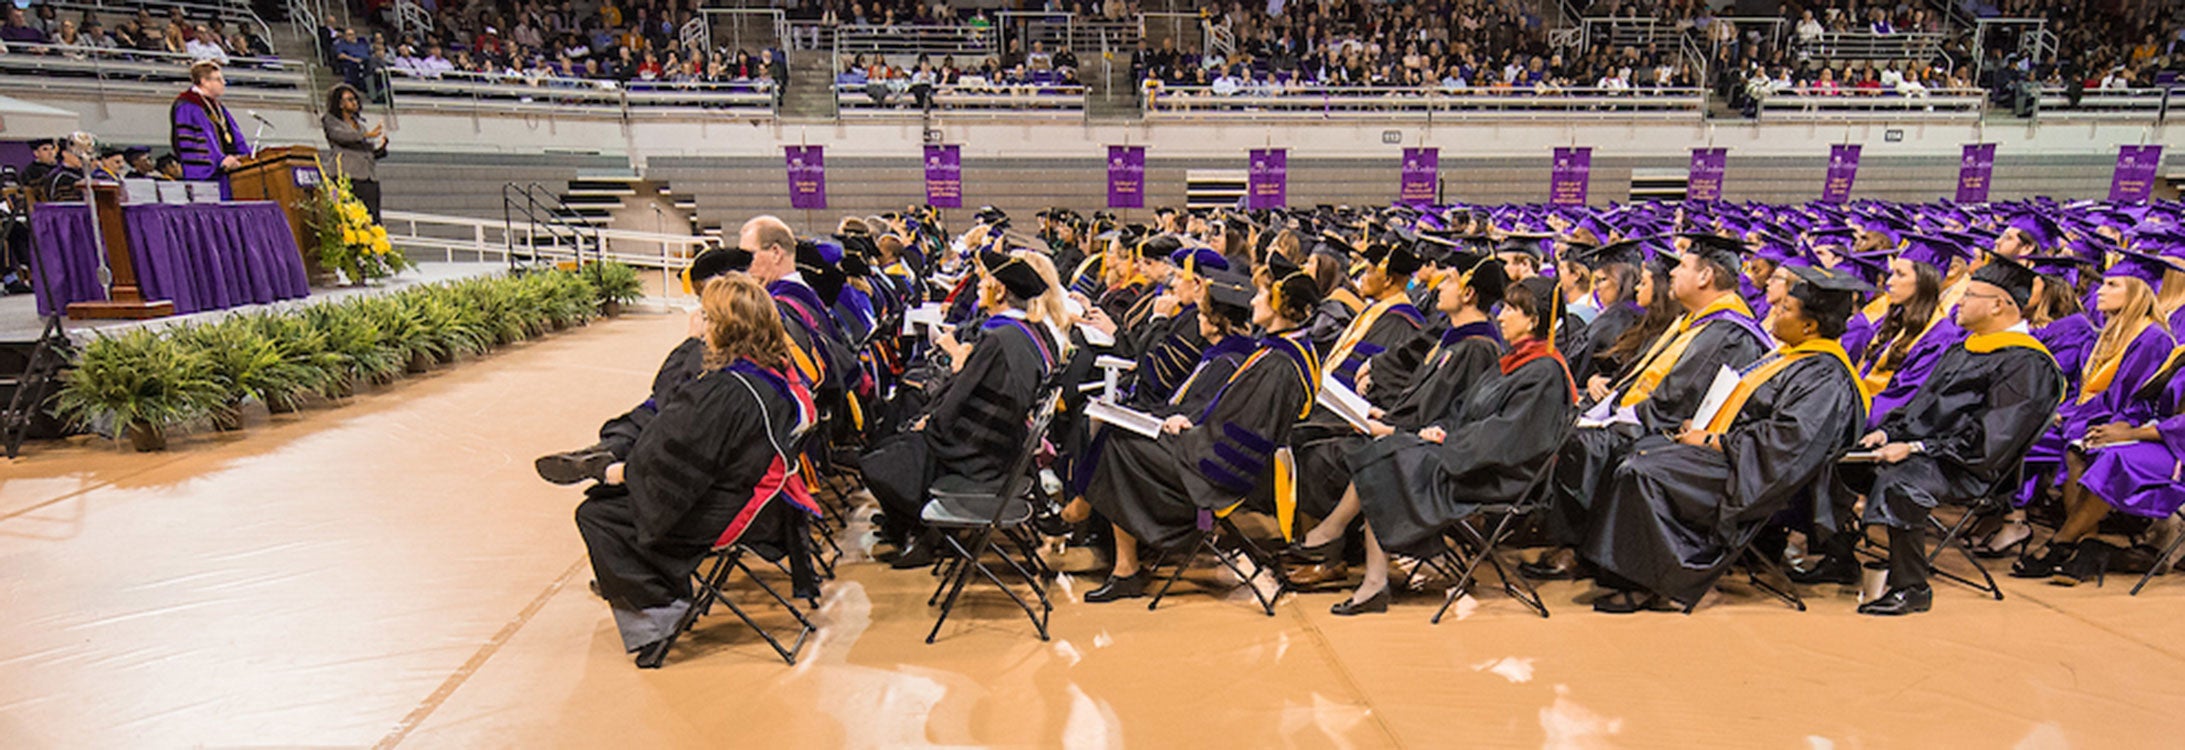 ECU’s Fall Commencement Ceremony will take place Friday, Dec. 14 at 9 a.m. in Minges Coliseum. (Photos by Cliff Hollis)